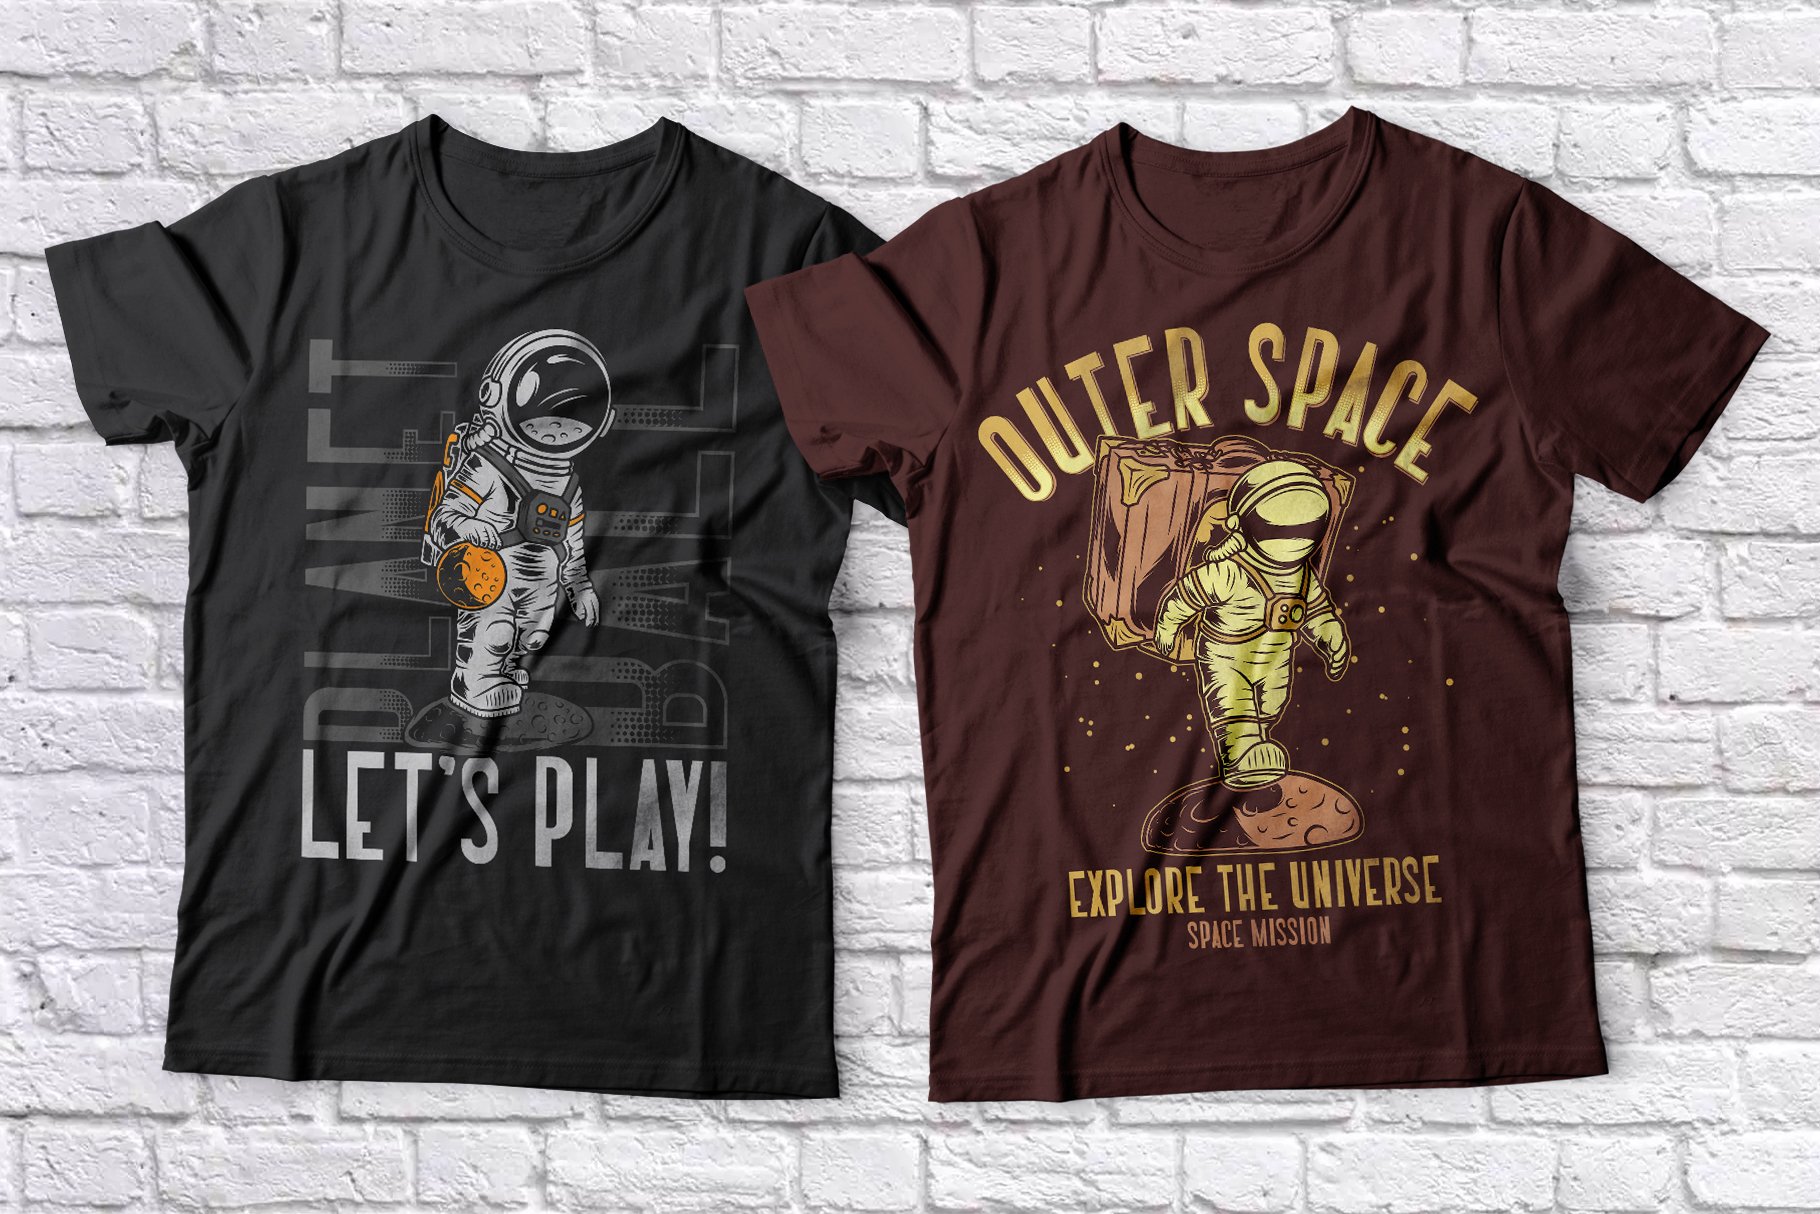 Black and brown t-shirts with astronauts.